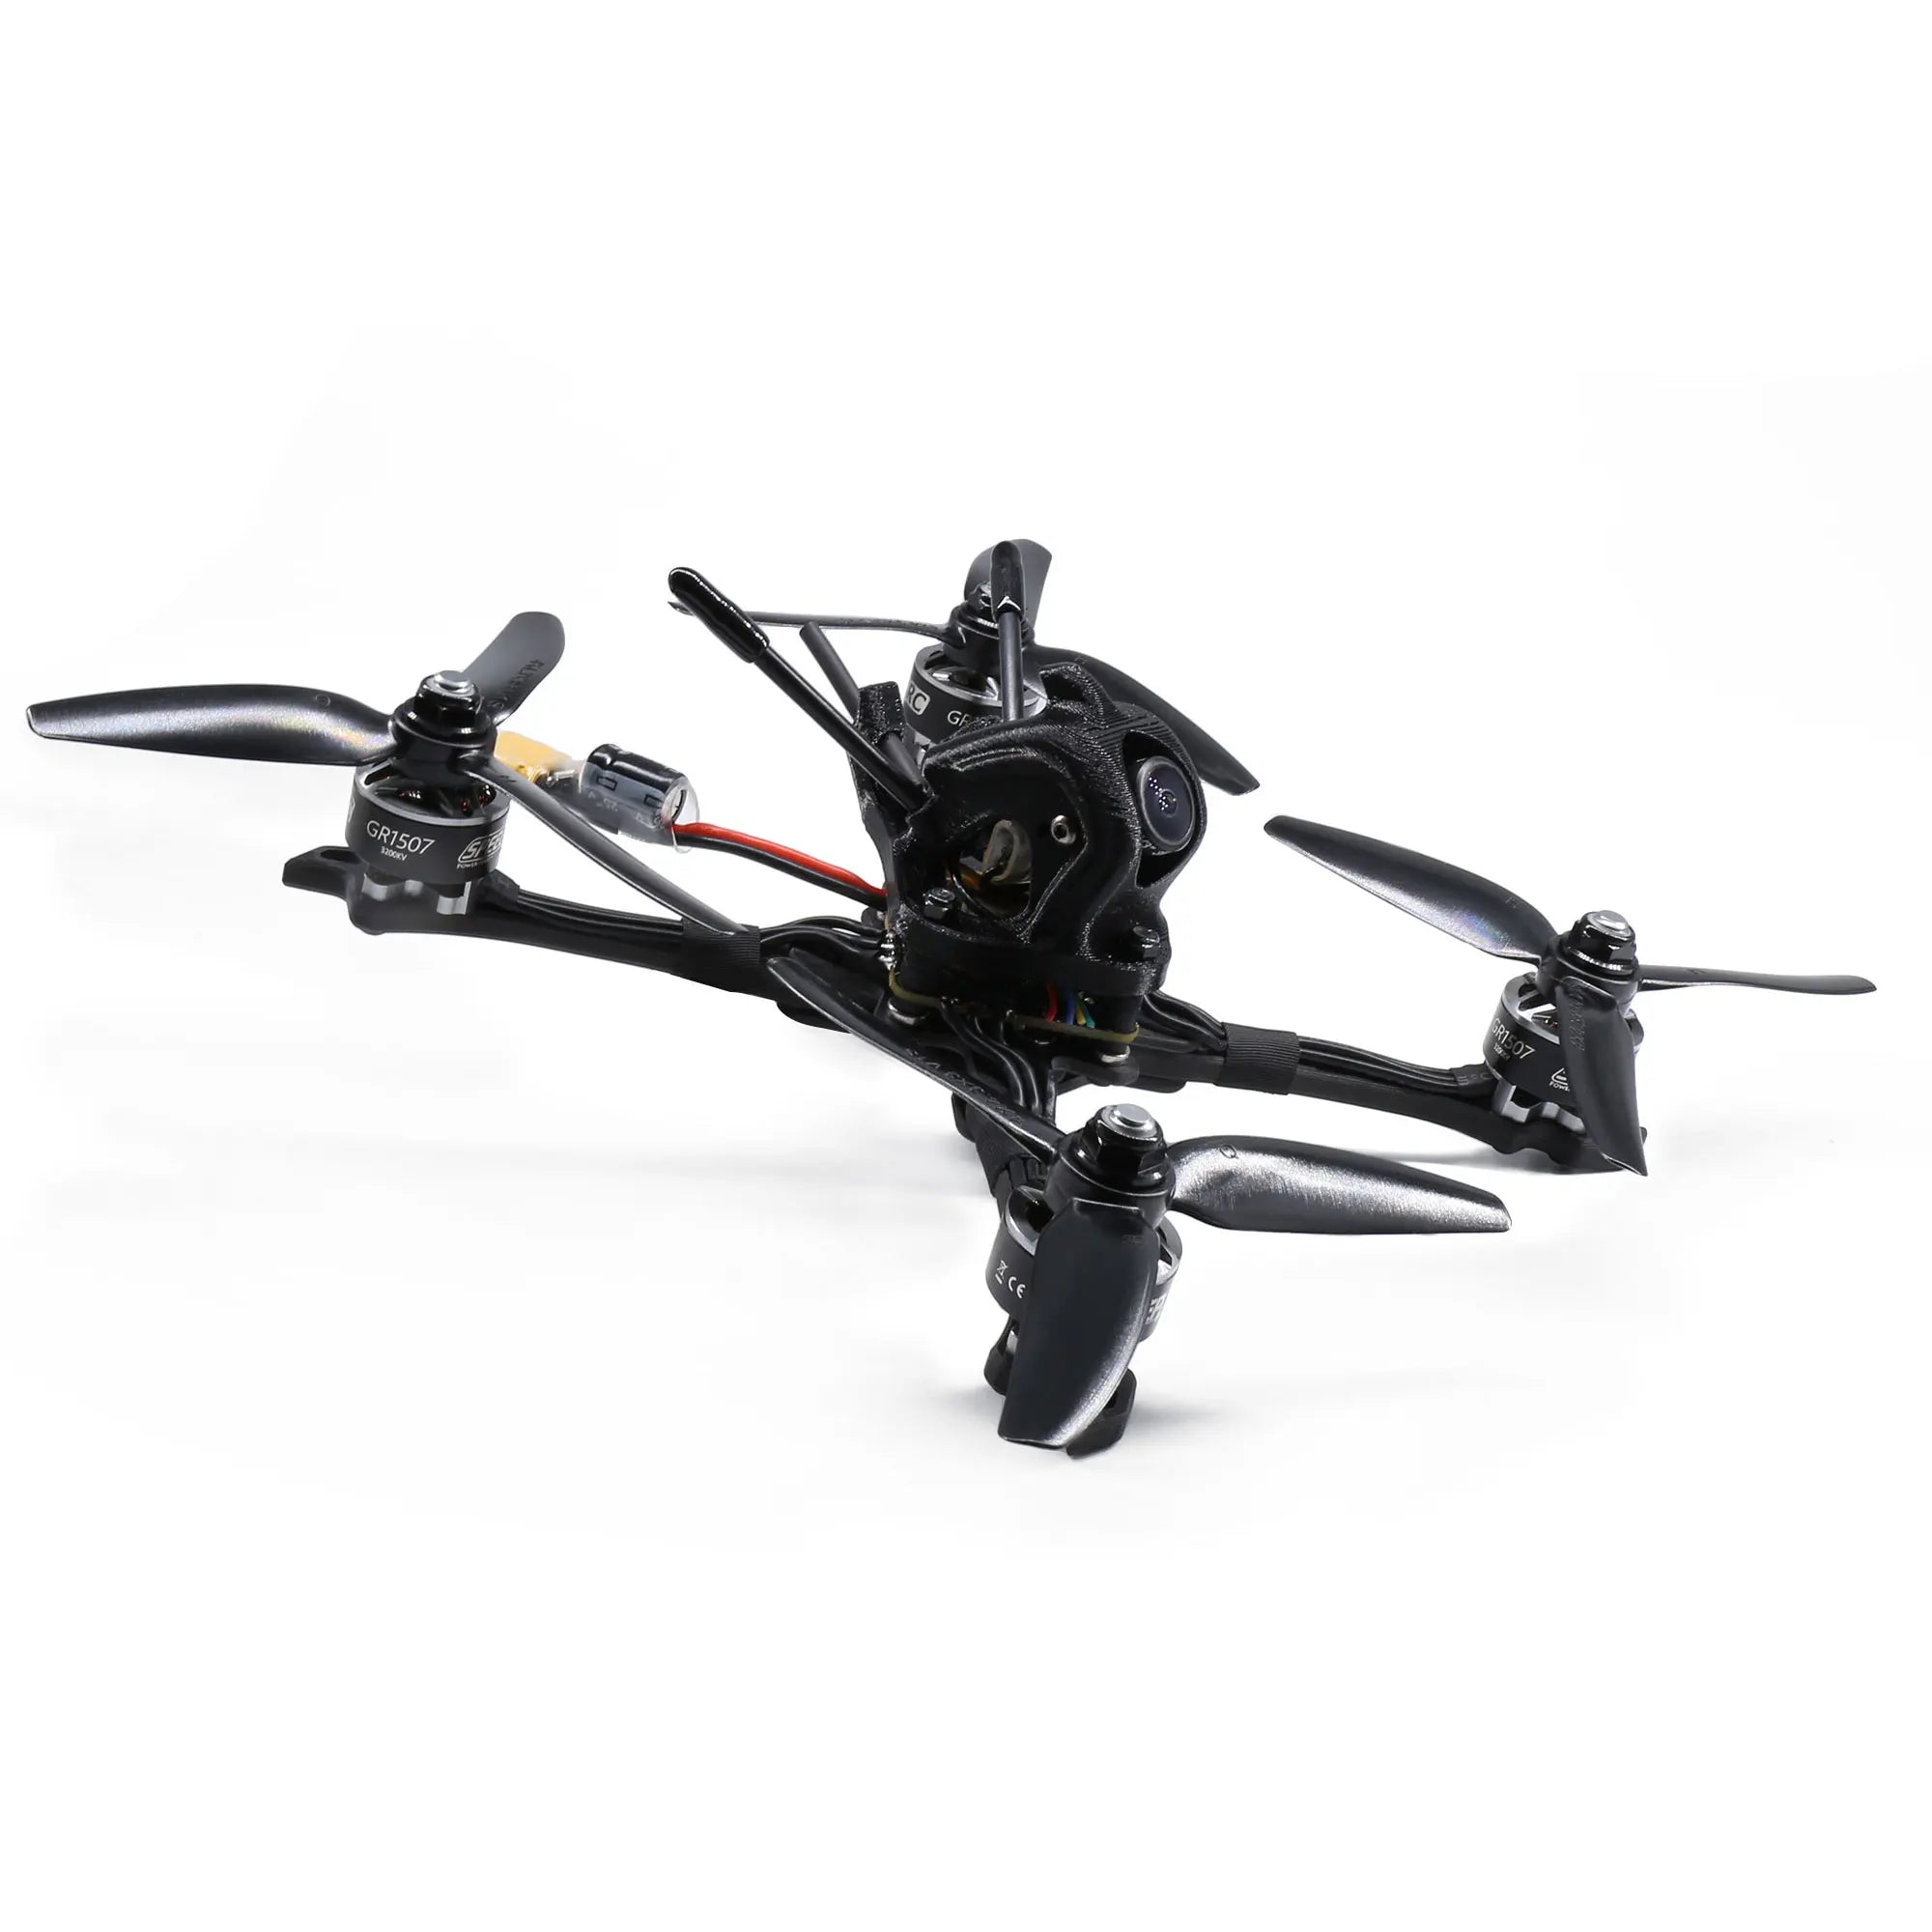 GEPRC Dolphin ToothPick FPV Drone, the flight controller has a silicone grommet included . the adjusted PID has 